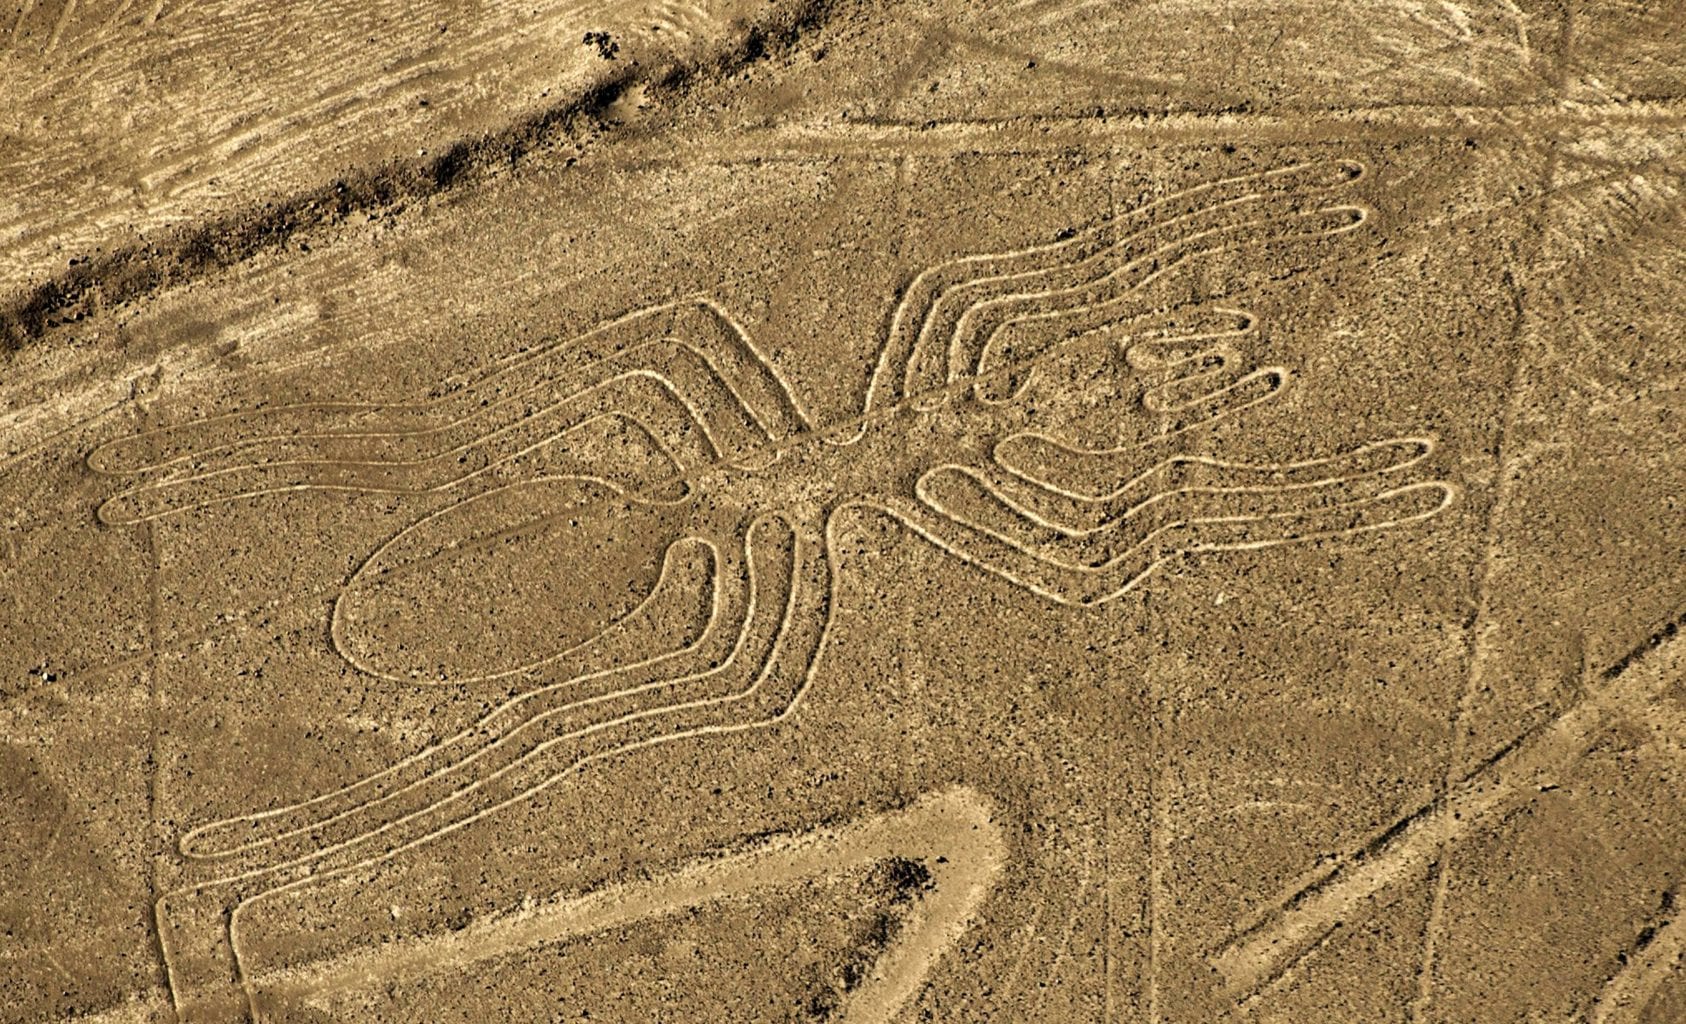 A Nazca geoglyph that closely resembles an ant. Credit: History.com